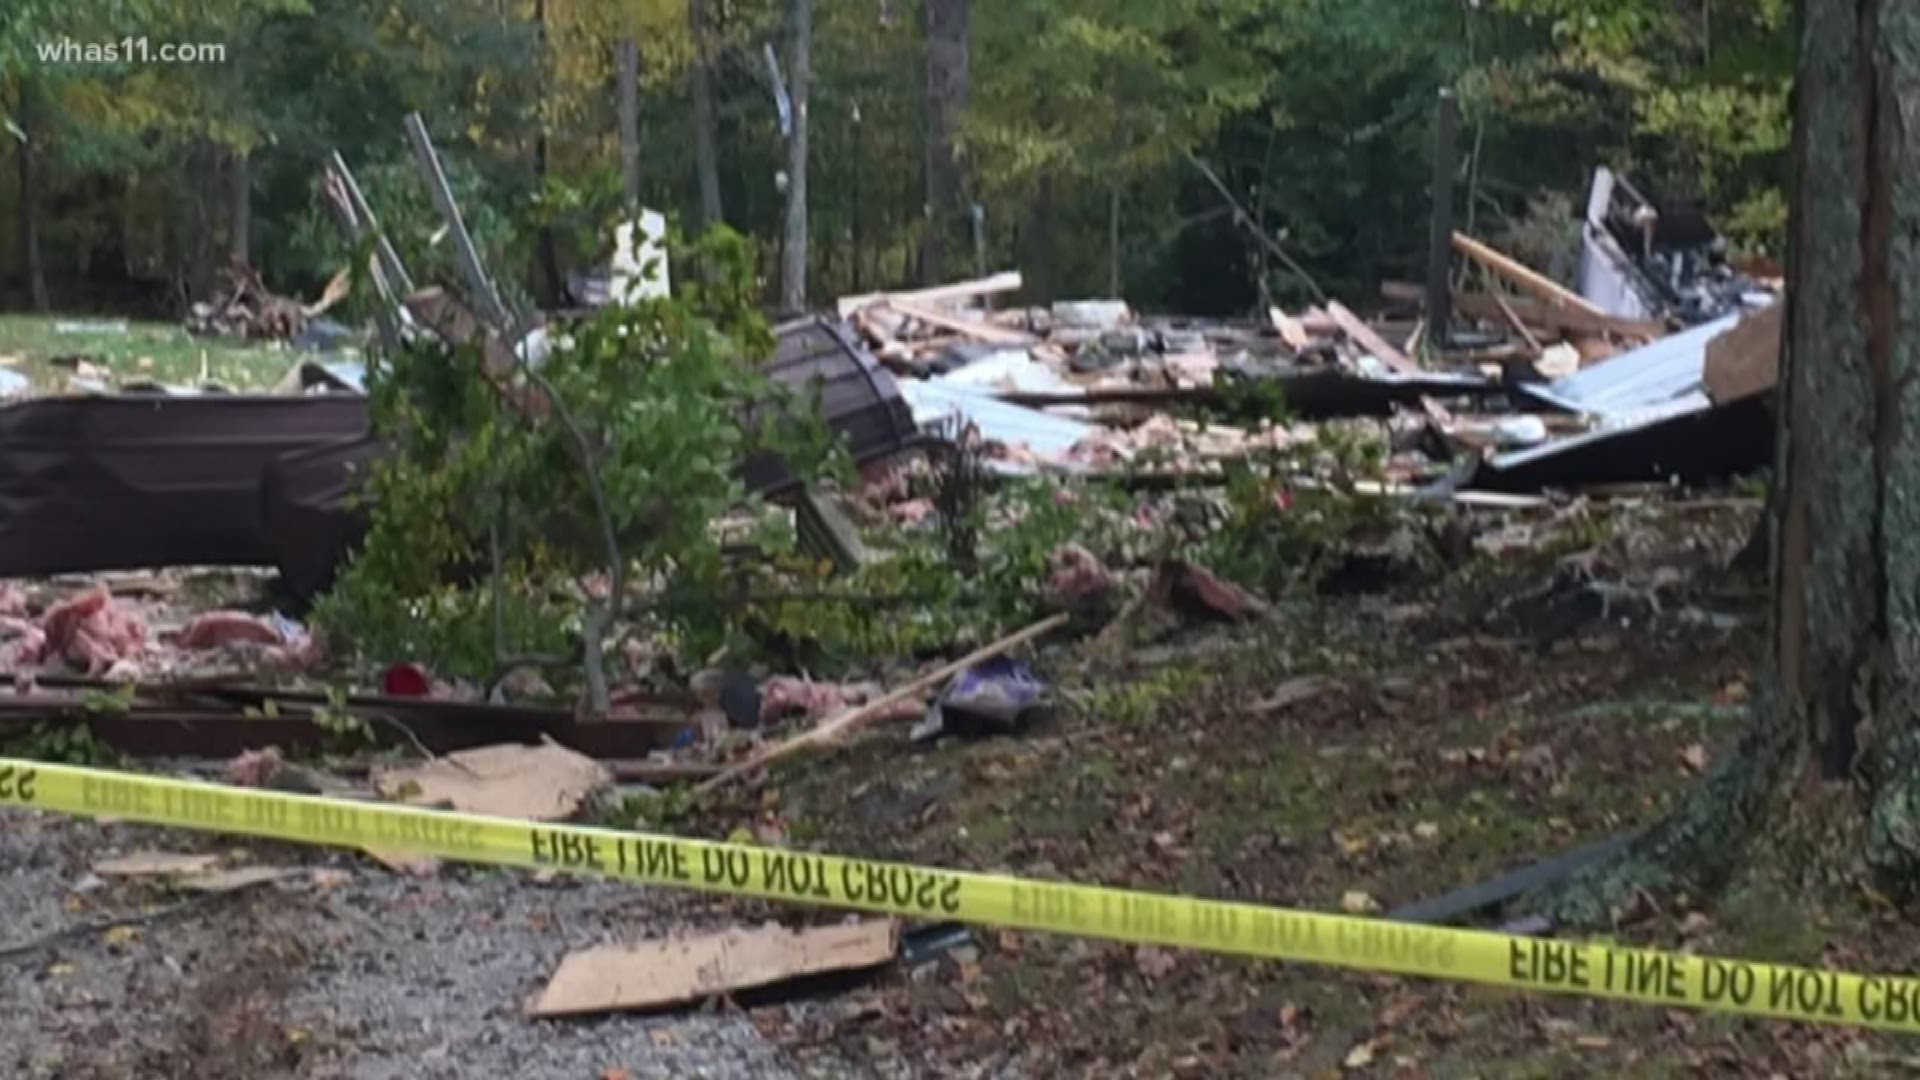 Kentucky State Police say 62-year-old Loretta Harris of Burnside was killed in the explosion Saturday in McDaniels.